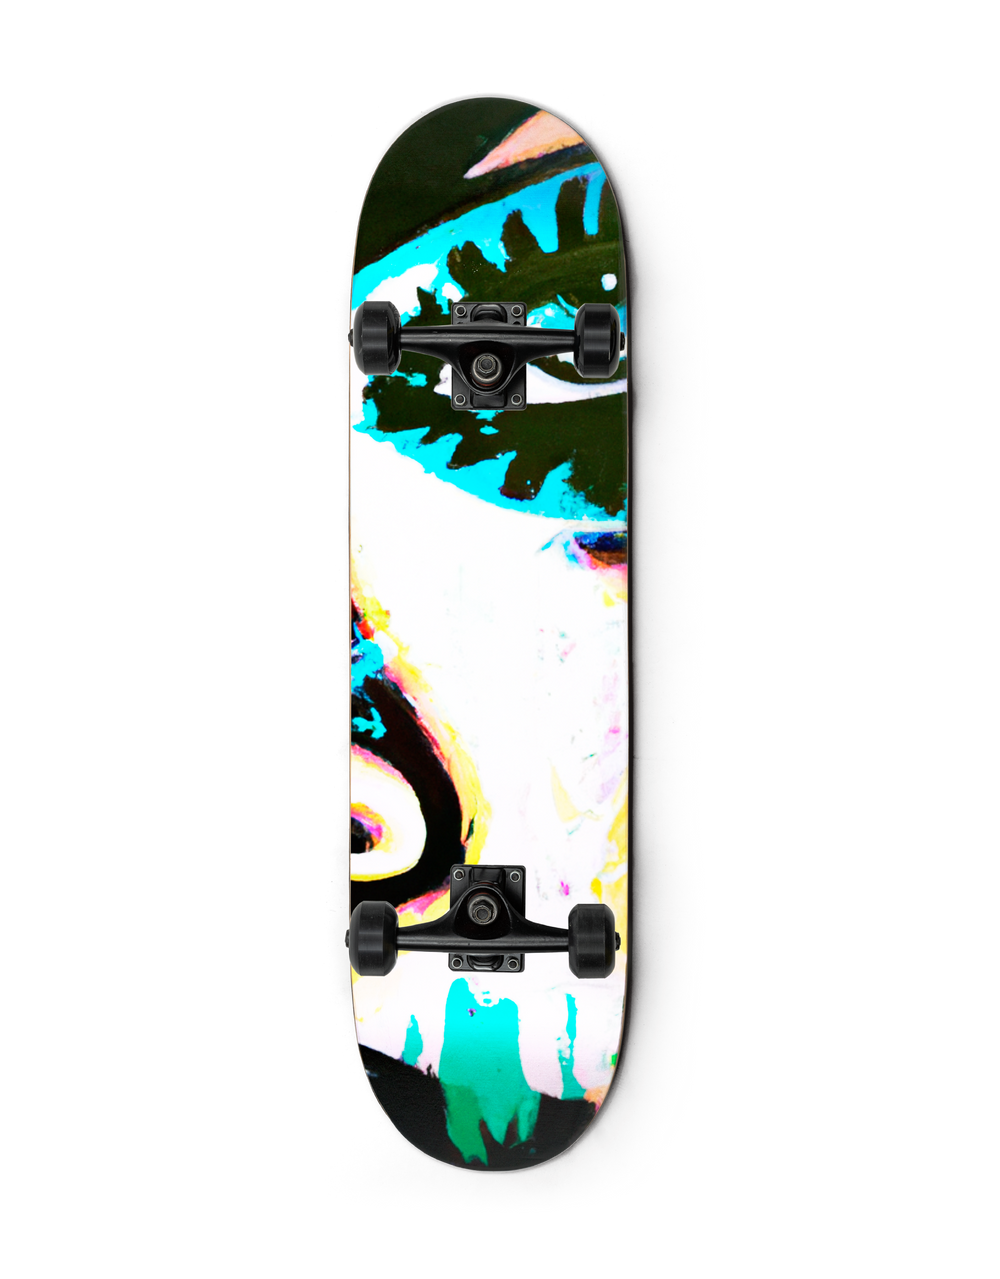 A collector skateboard painted with vibrant colors, evoking the face of a woman.